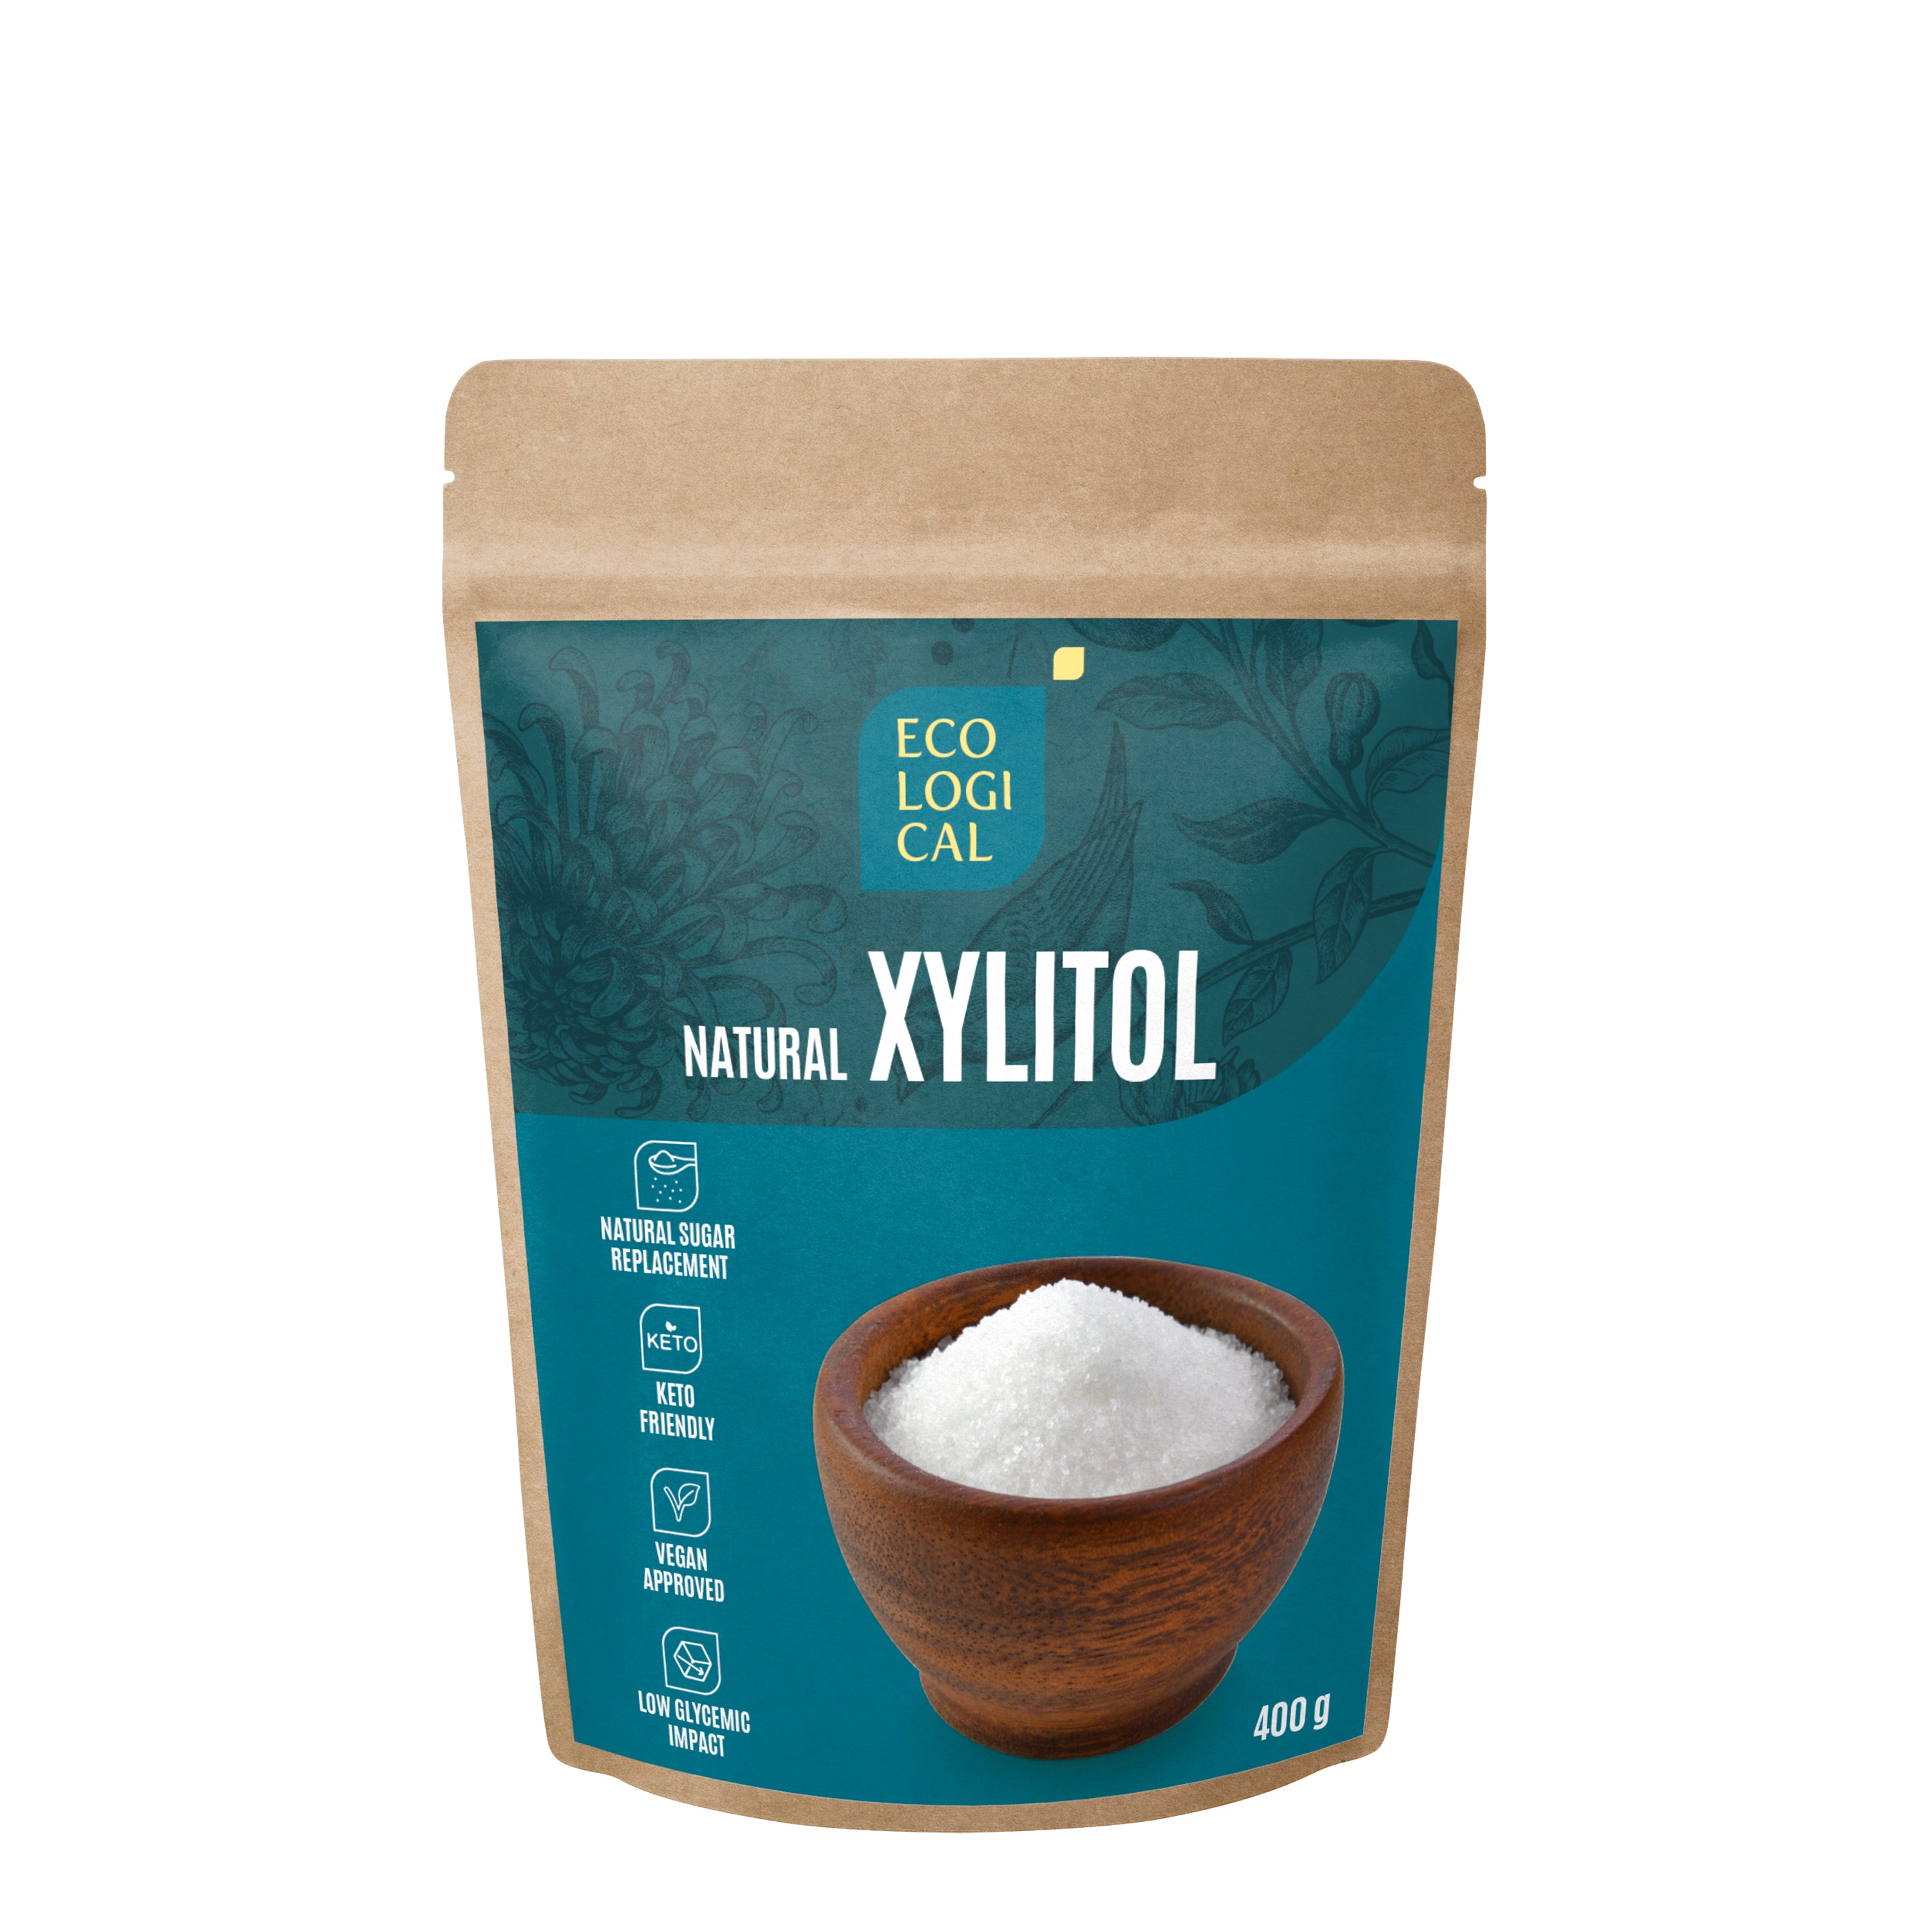 Premium ECOLOGICAL Natural Xylitol, 400g - Sugar Substitute for Healthy and Sustainable Living